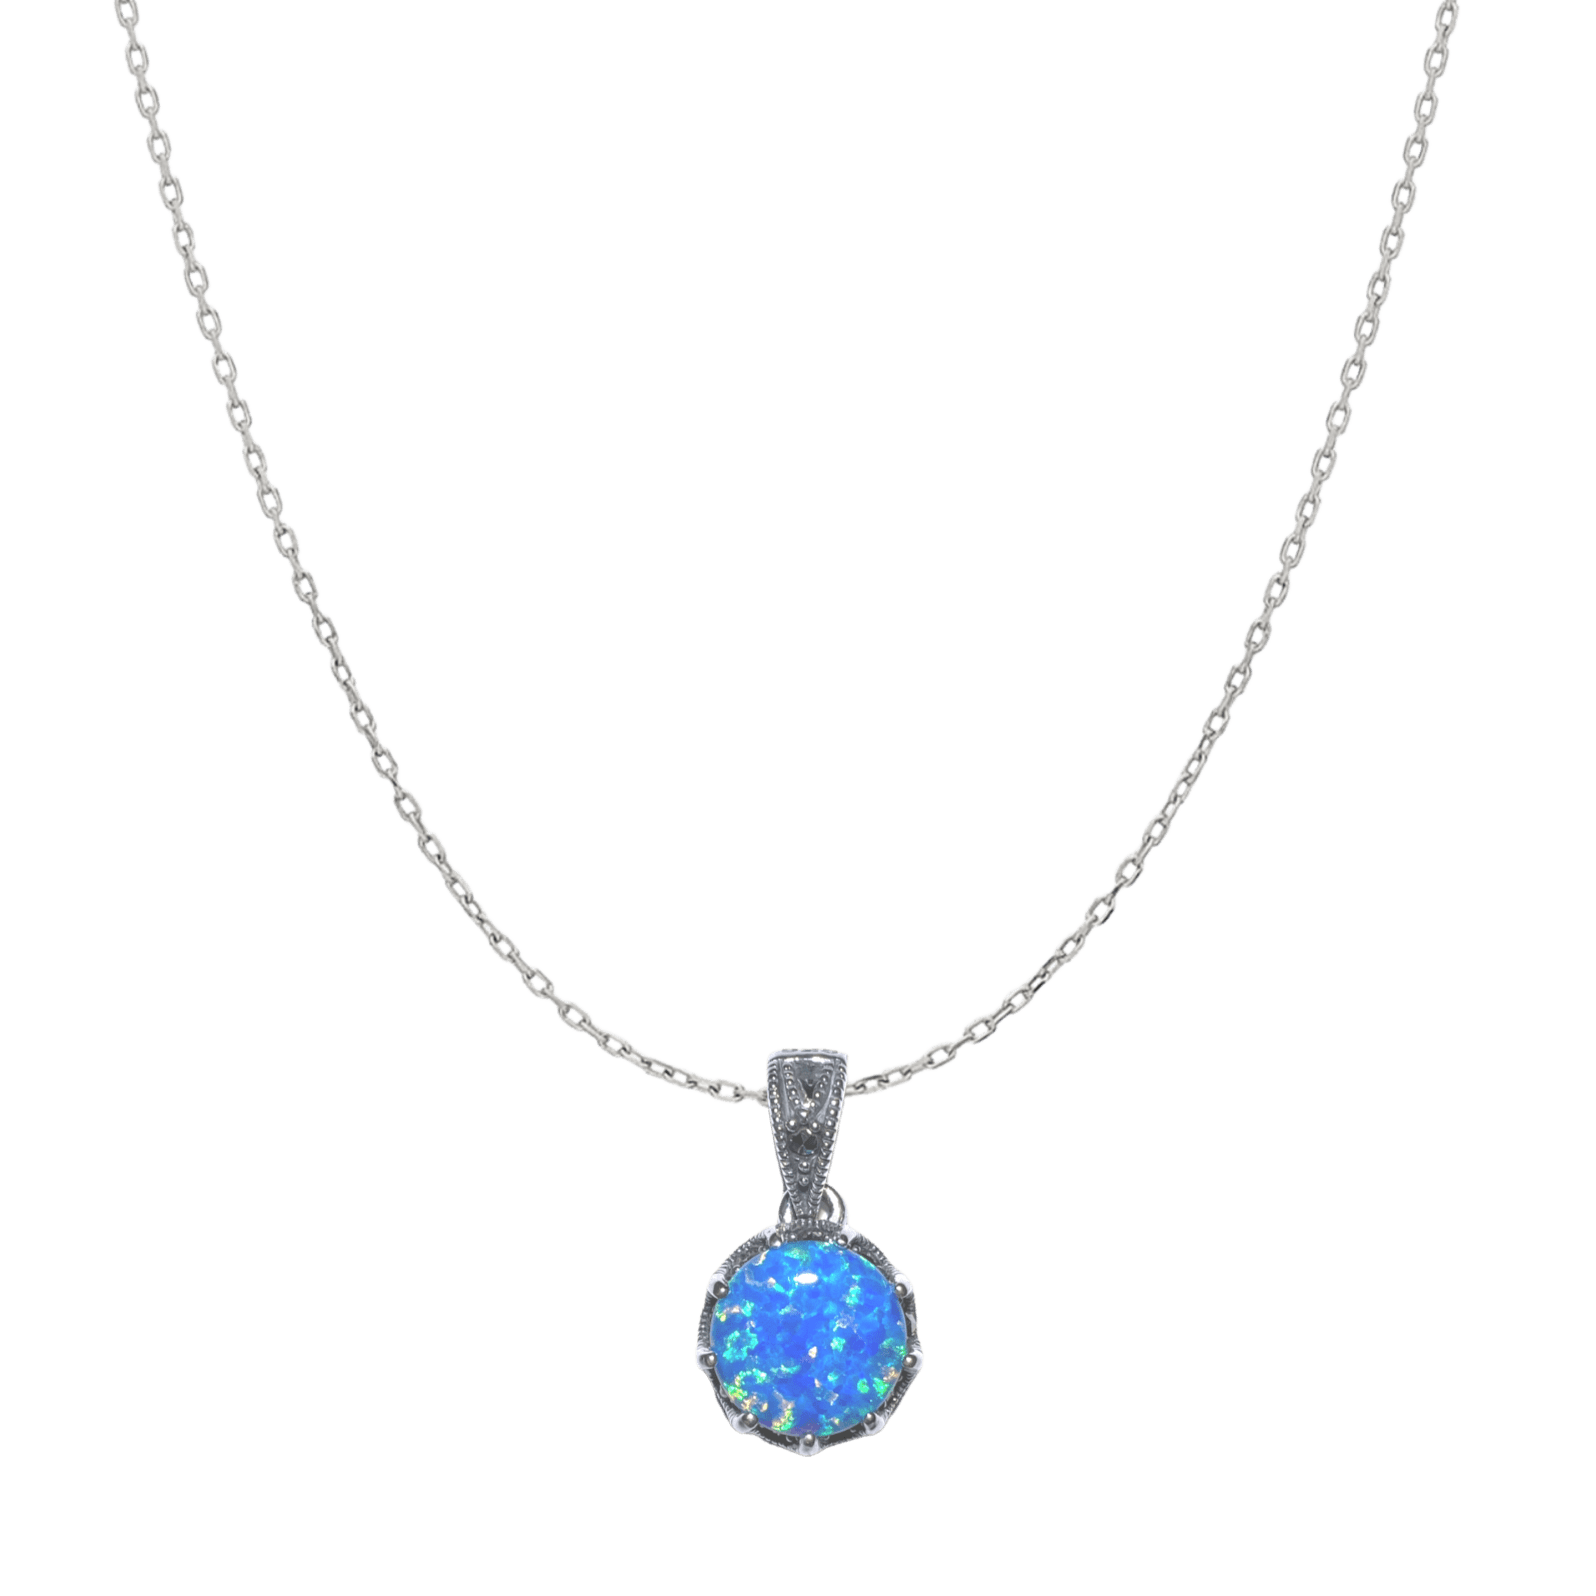 Spero London Women's Circle High Quality Opal Sterling Silver Pendant Necklace - Blue In Metallic